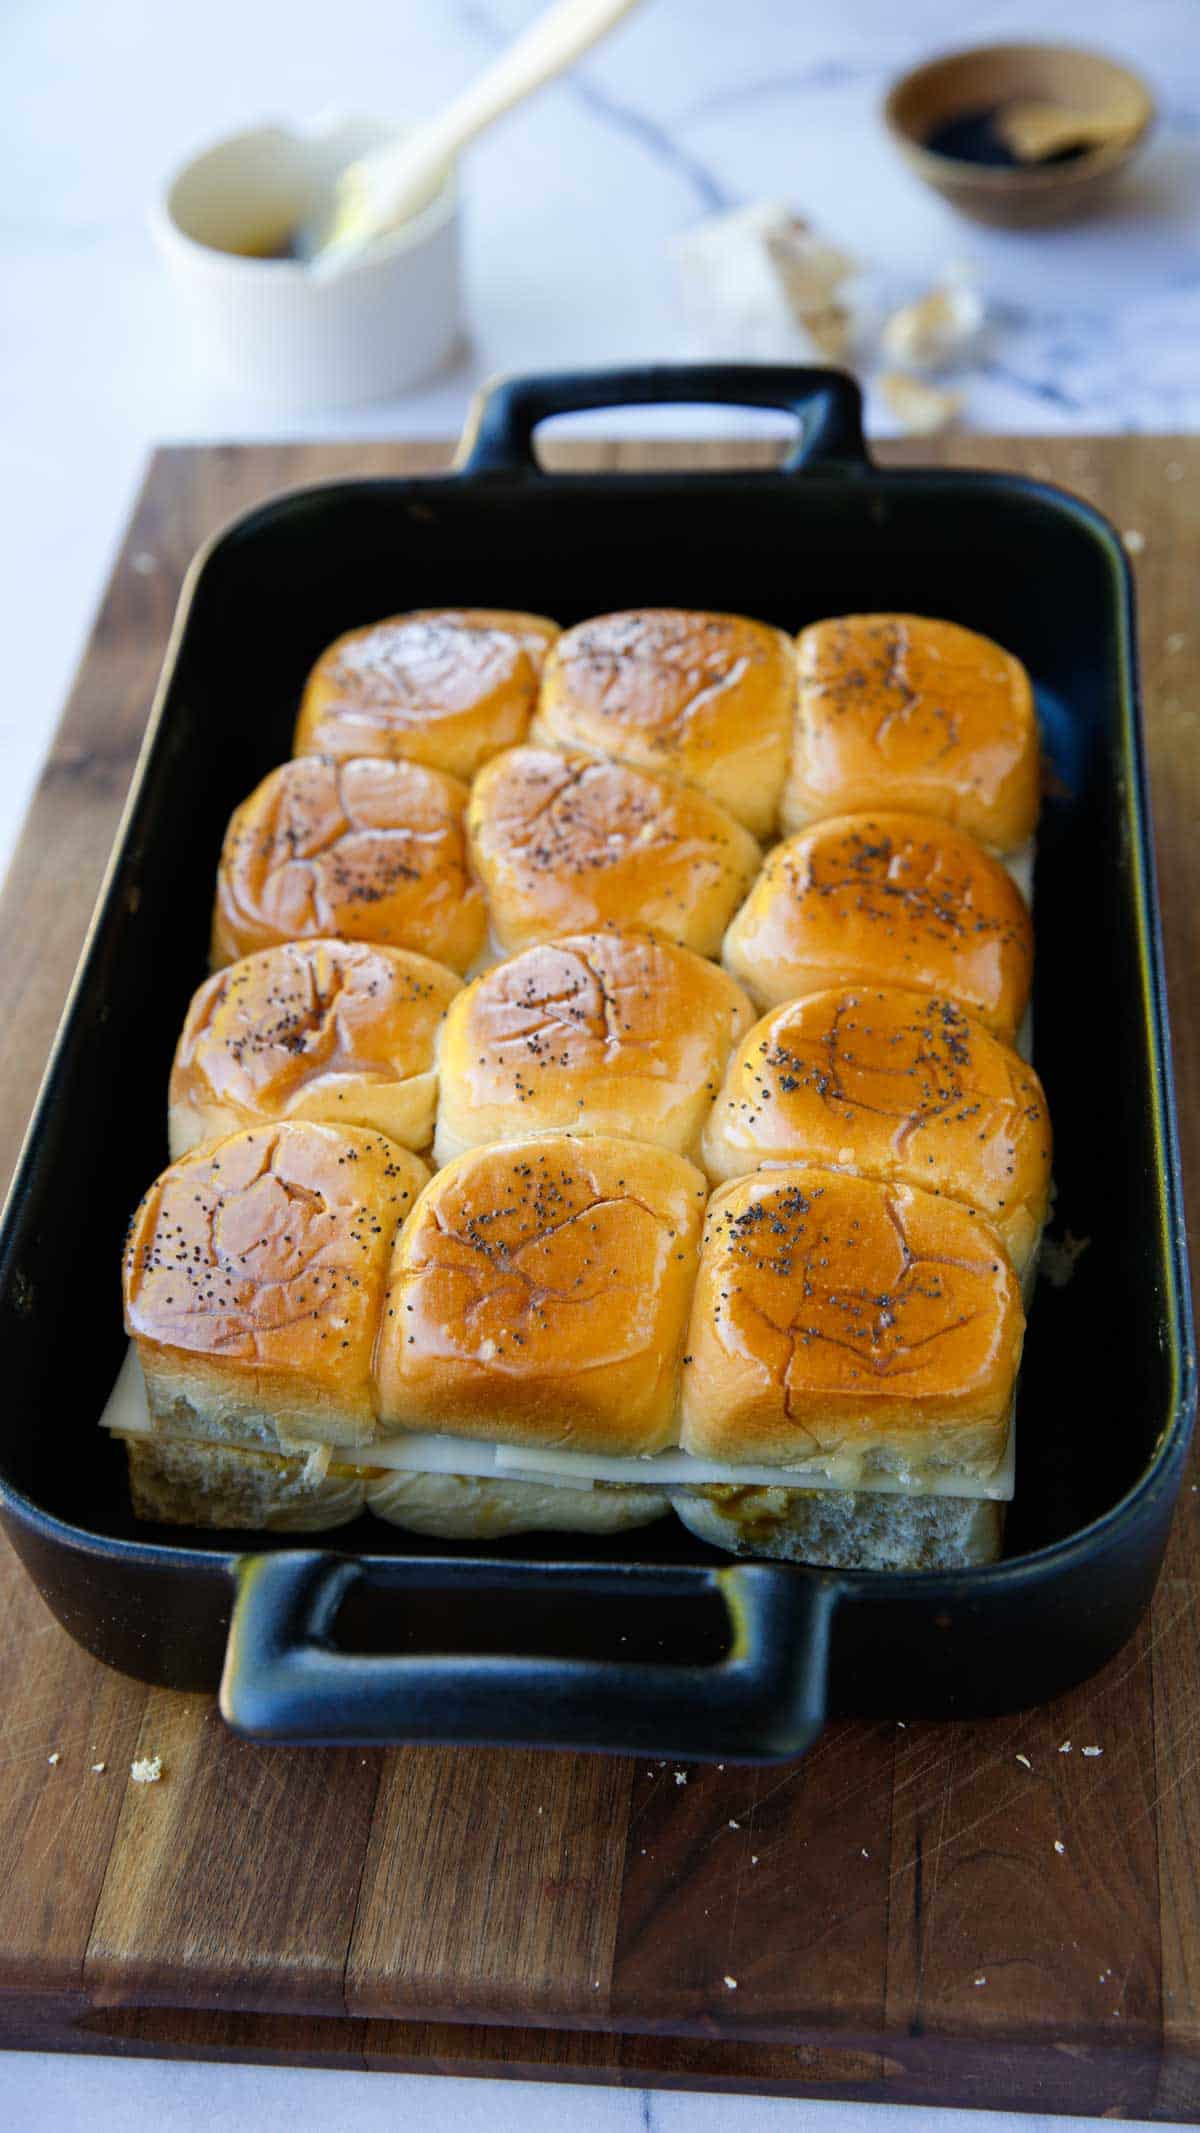 A black casserole dish filled with Ham and hese sliders made with Hawaiian Rolls